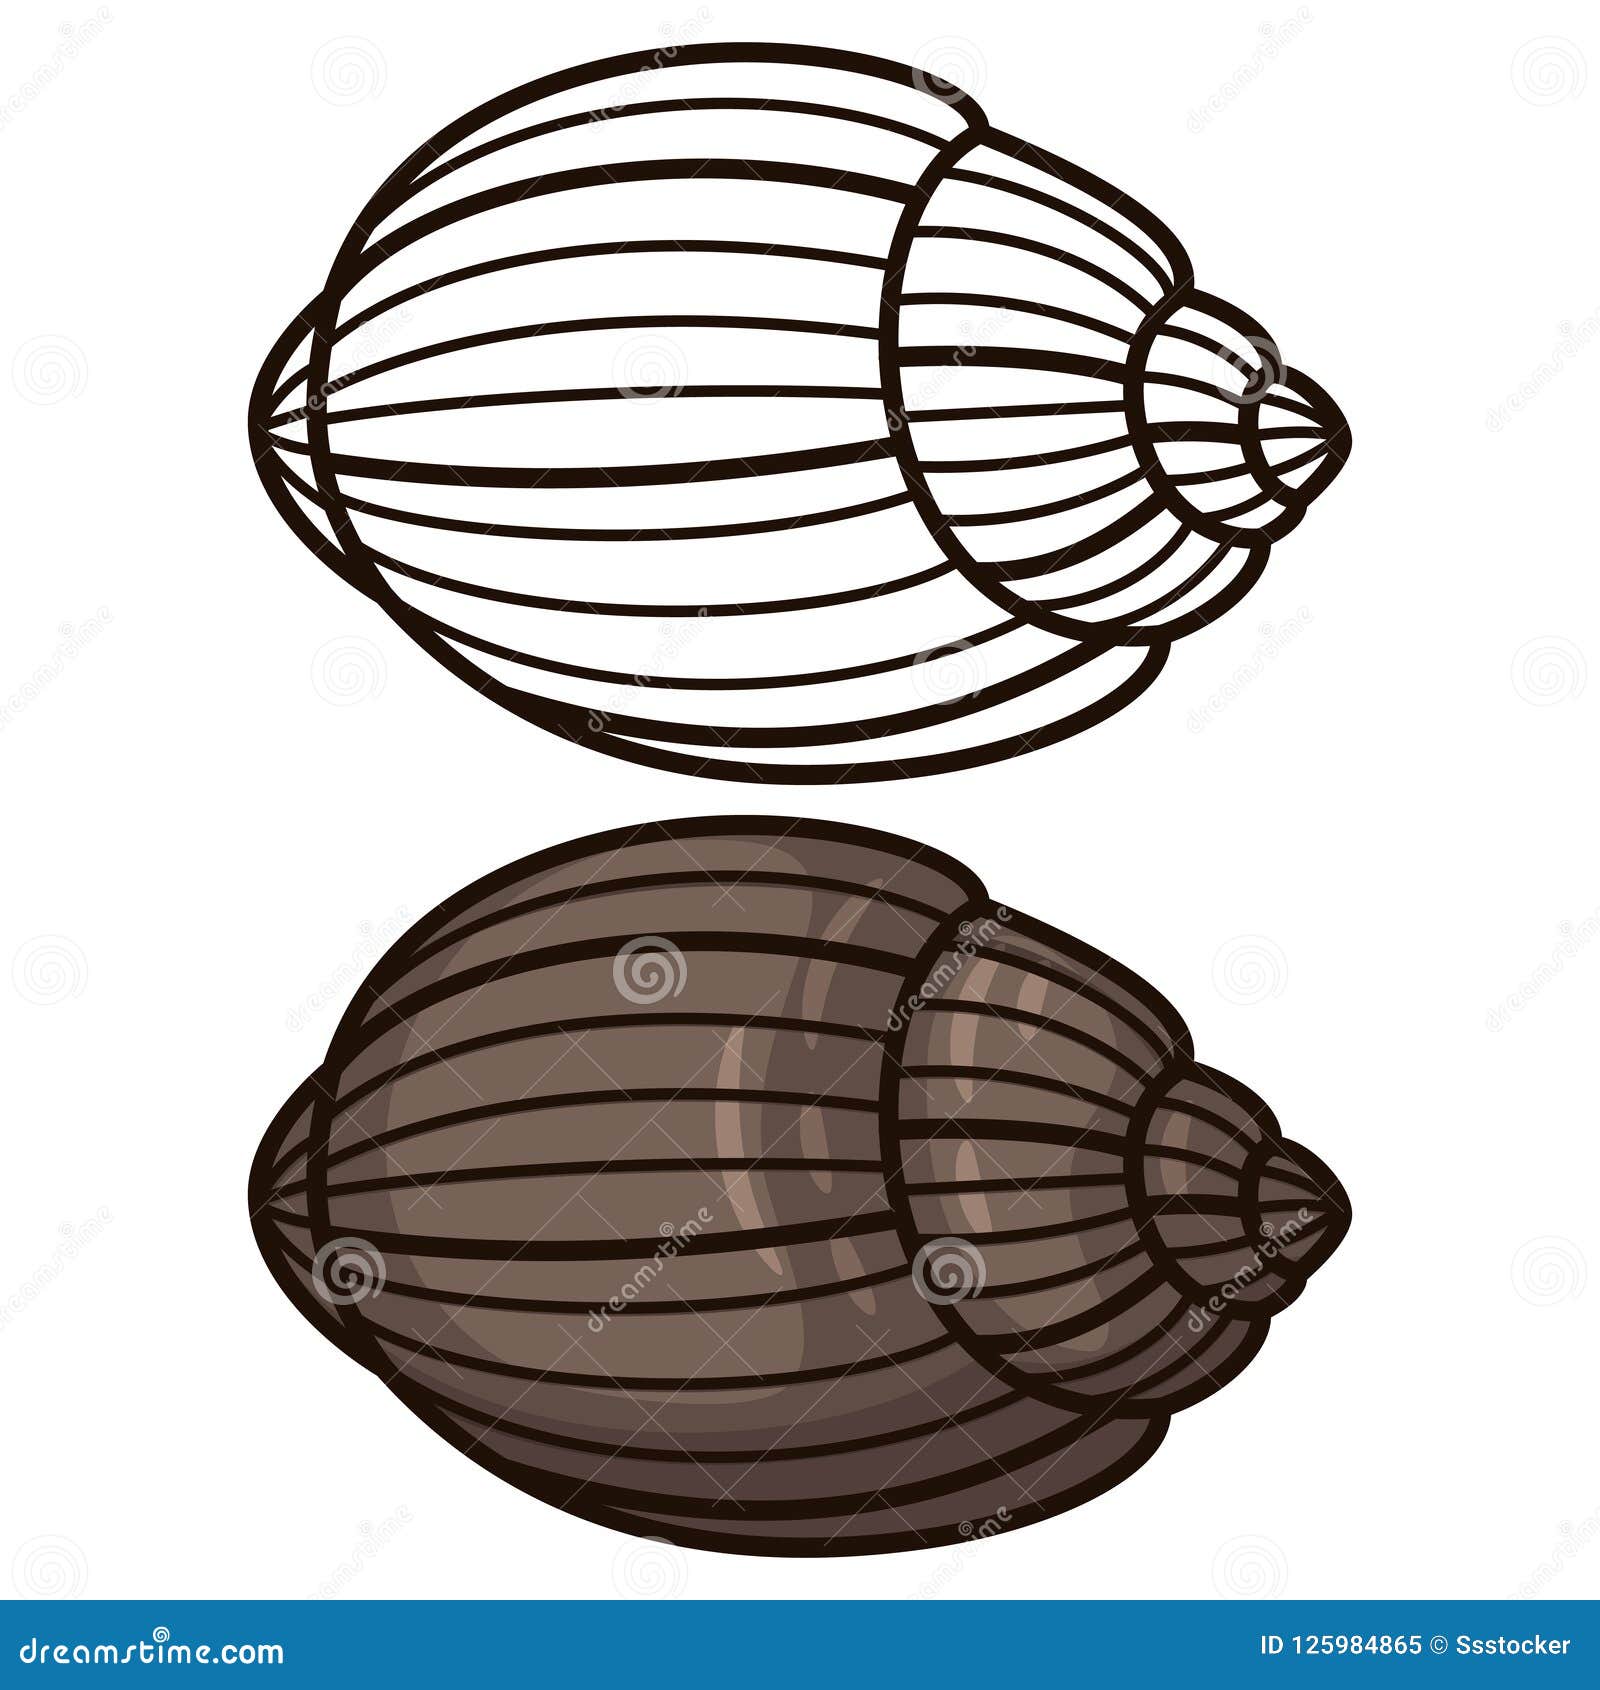 Download Seashell Coloring Stock Illustrations 925 Seashell Coloring Stock Illustrations Vectors Clipart Dreamstime